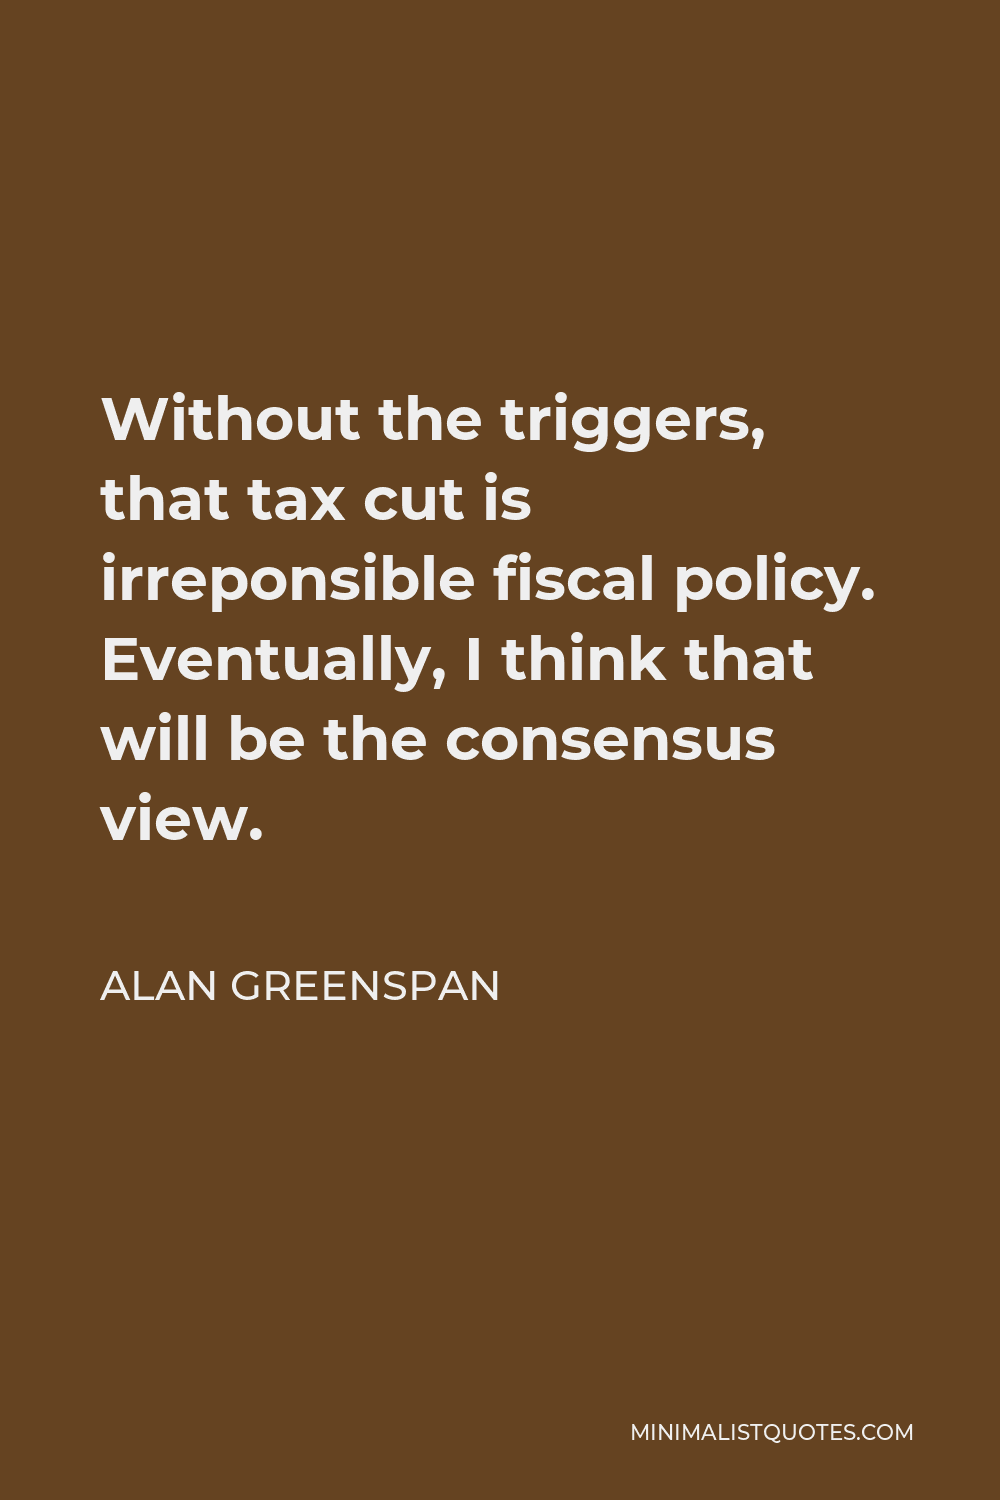 Alan Greenspan Quote - Without the triggers, that tax cut is irreponsible fiscal policy. Eventually, I think that will be the consensus view.